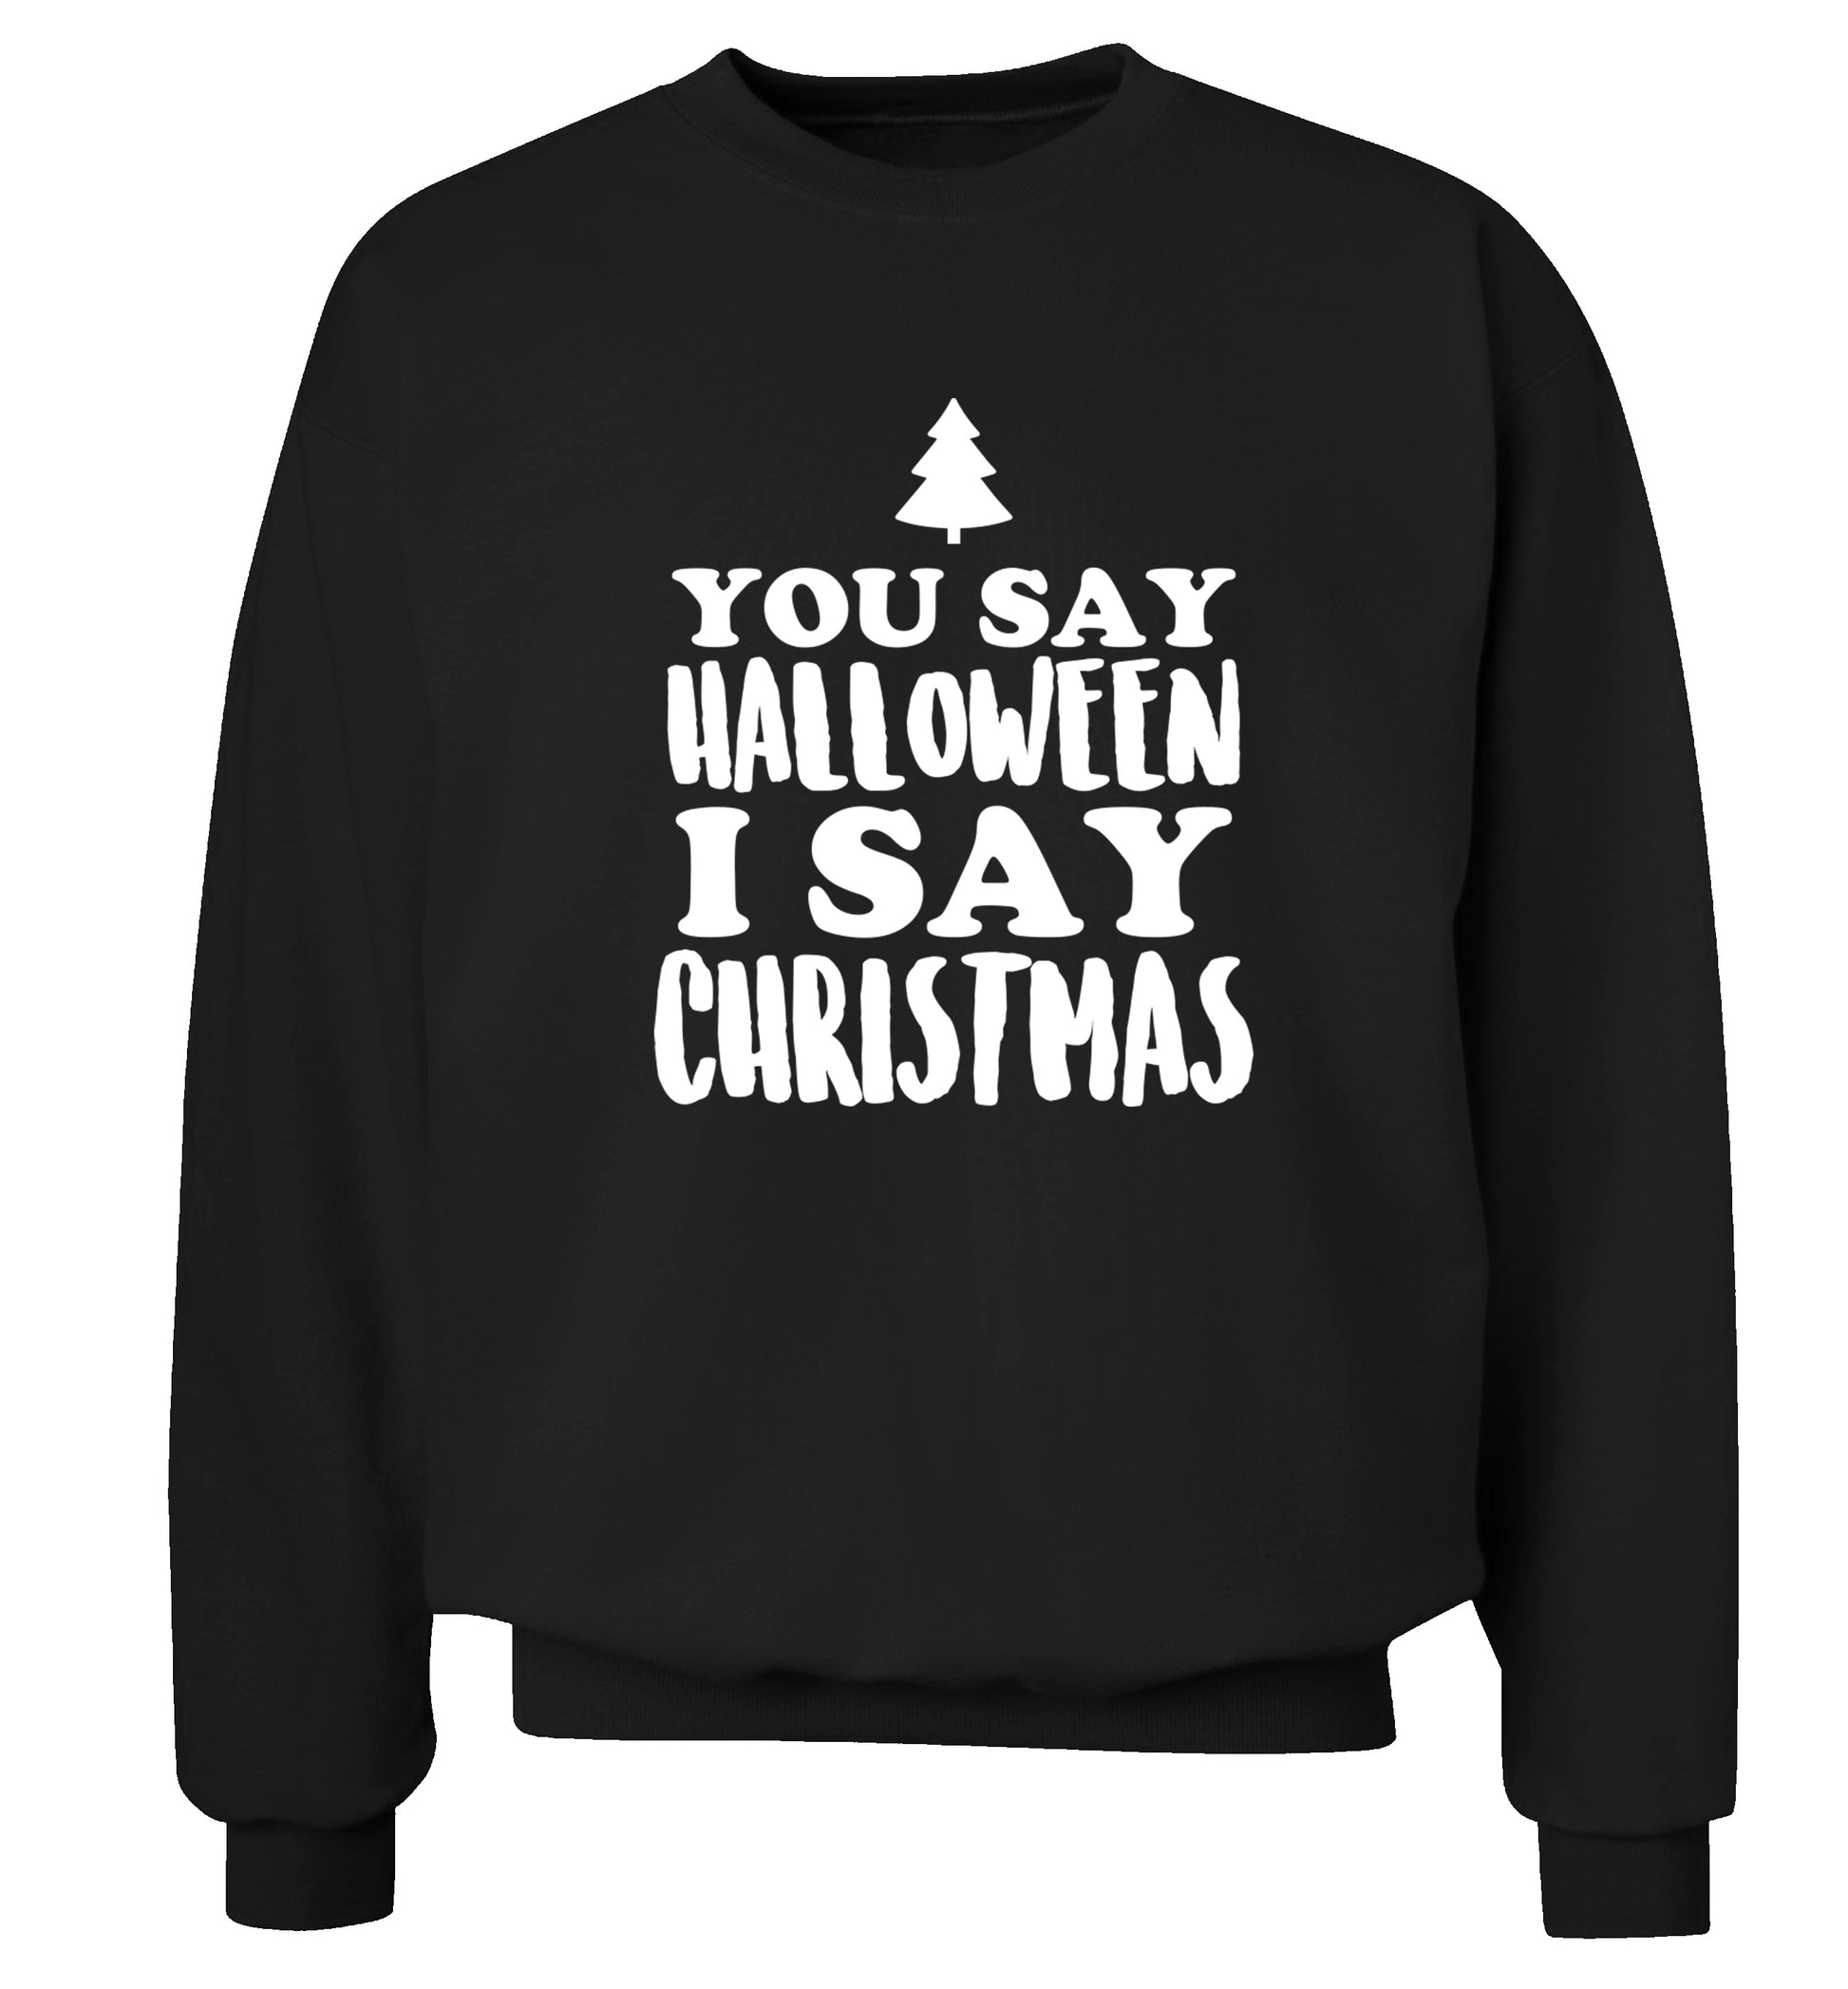 You say halloween I say christmas! Adult's unisex black Sweater 2XL